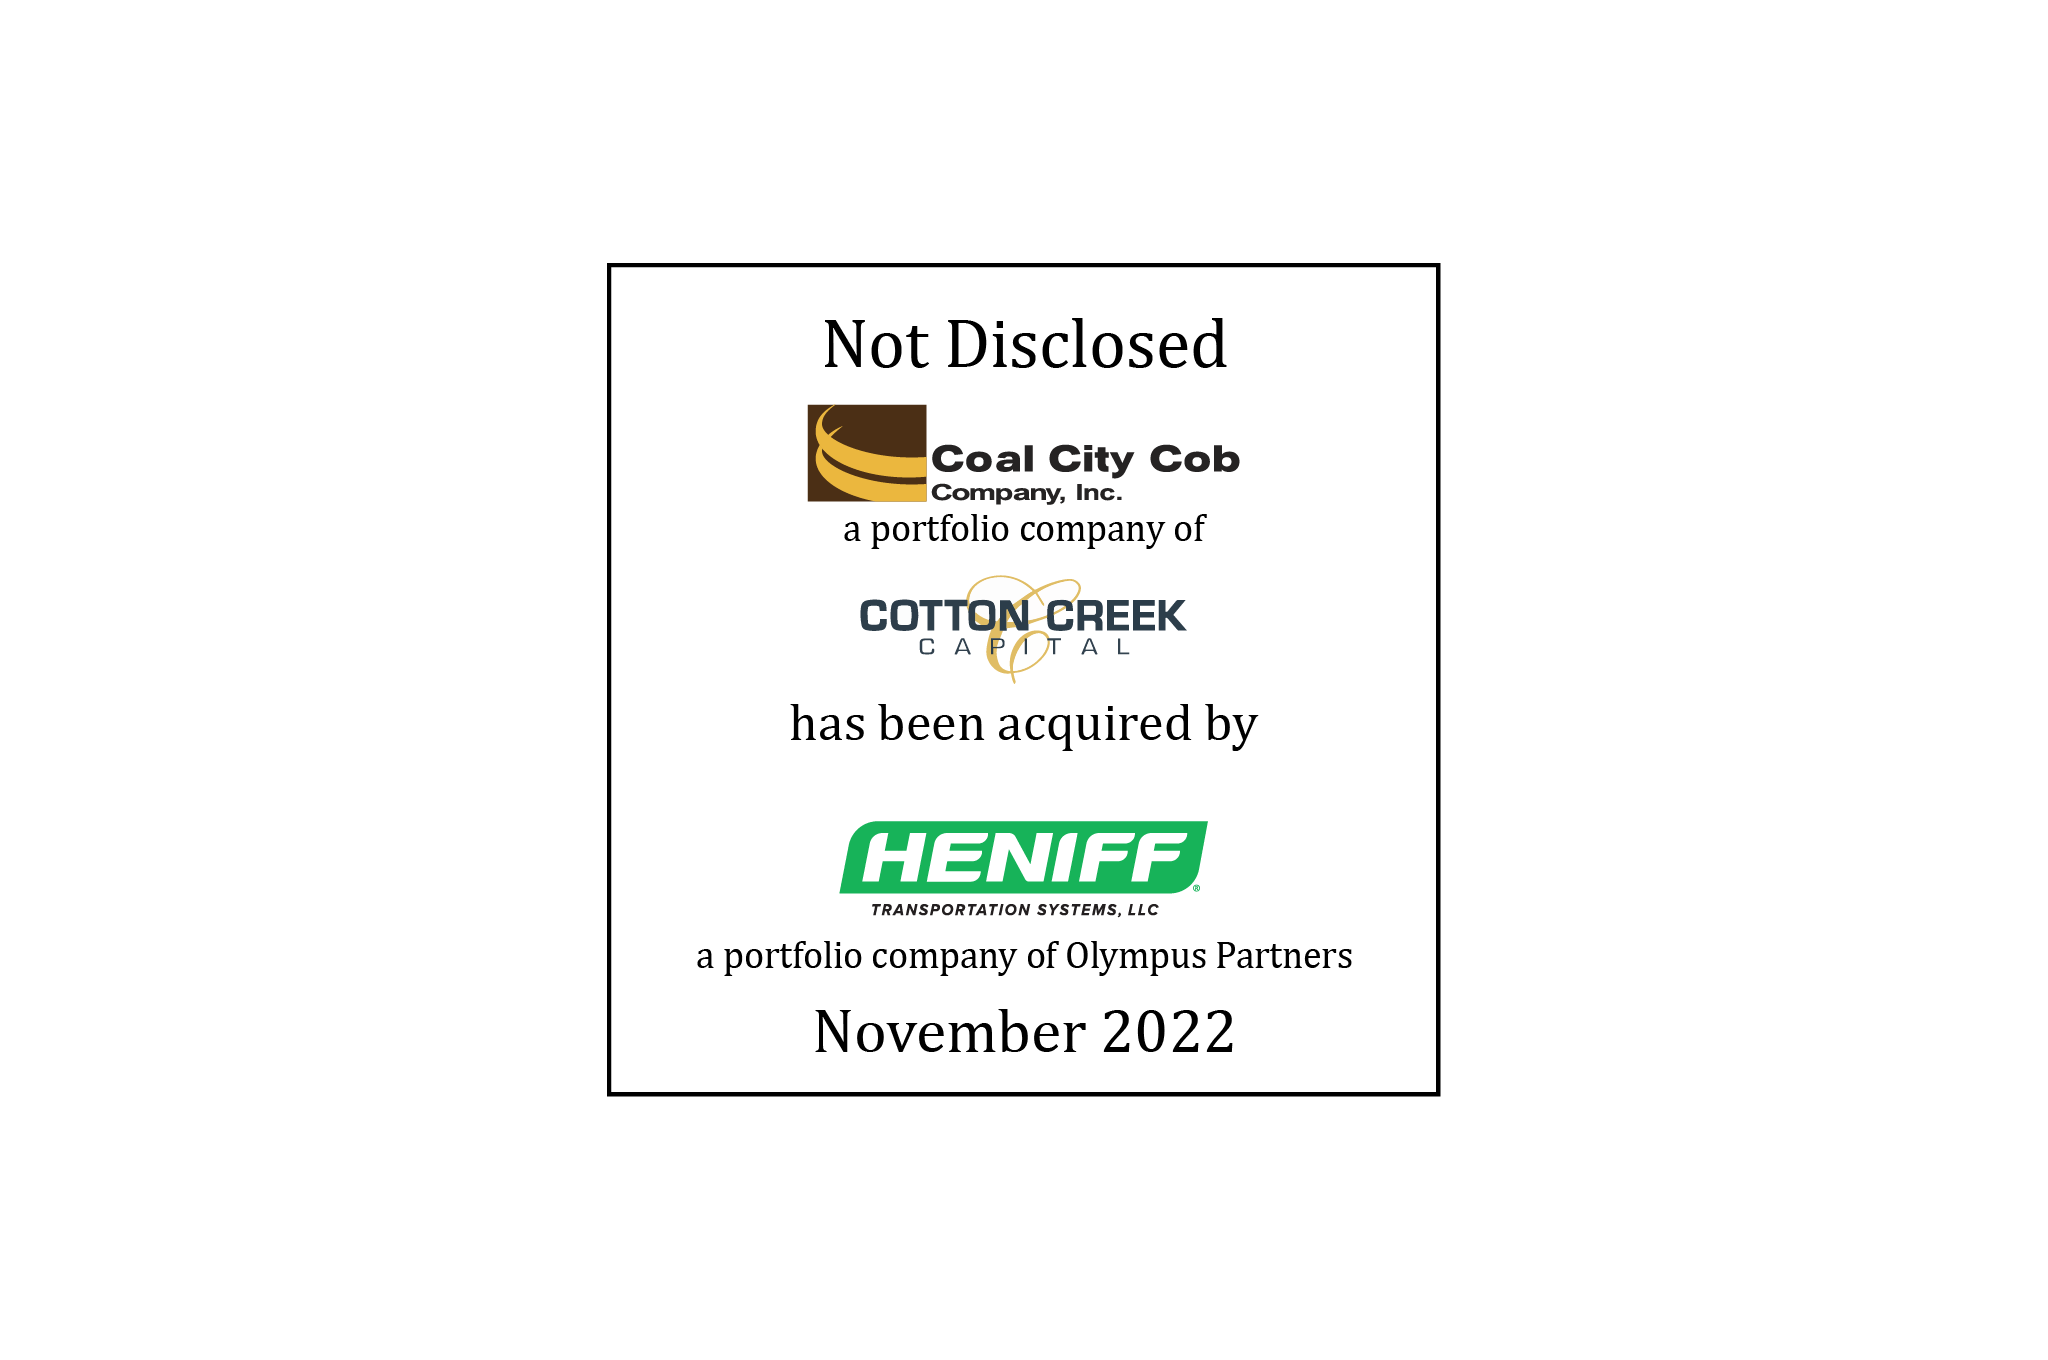 Not Disclosed | Coal City Cob (log0), a portfolio company of Cotton Creek Capital, Has Been Acquired by  Heniff Transportation Systems, a portfolio company of Olympus Partners | November 2022